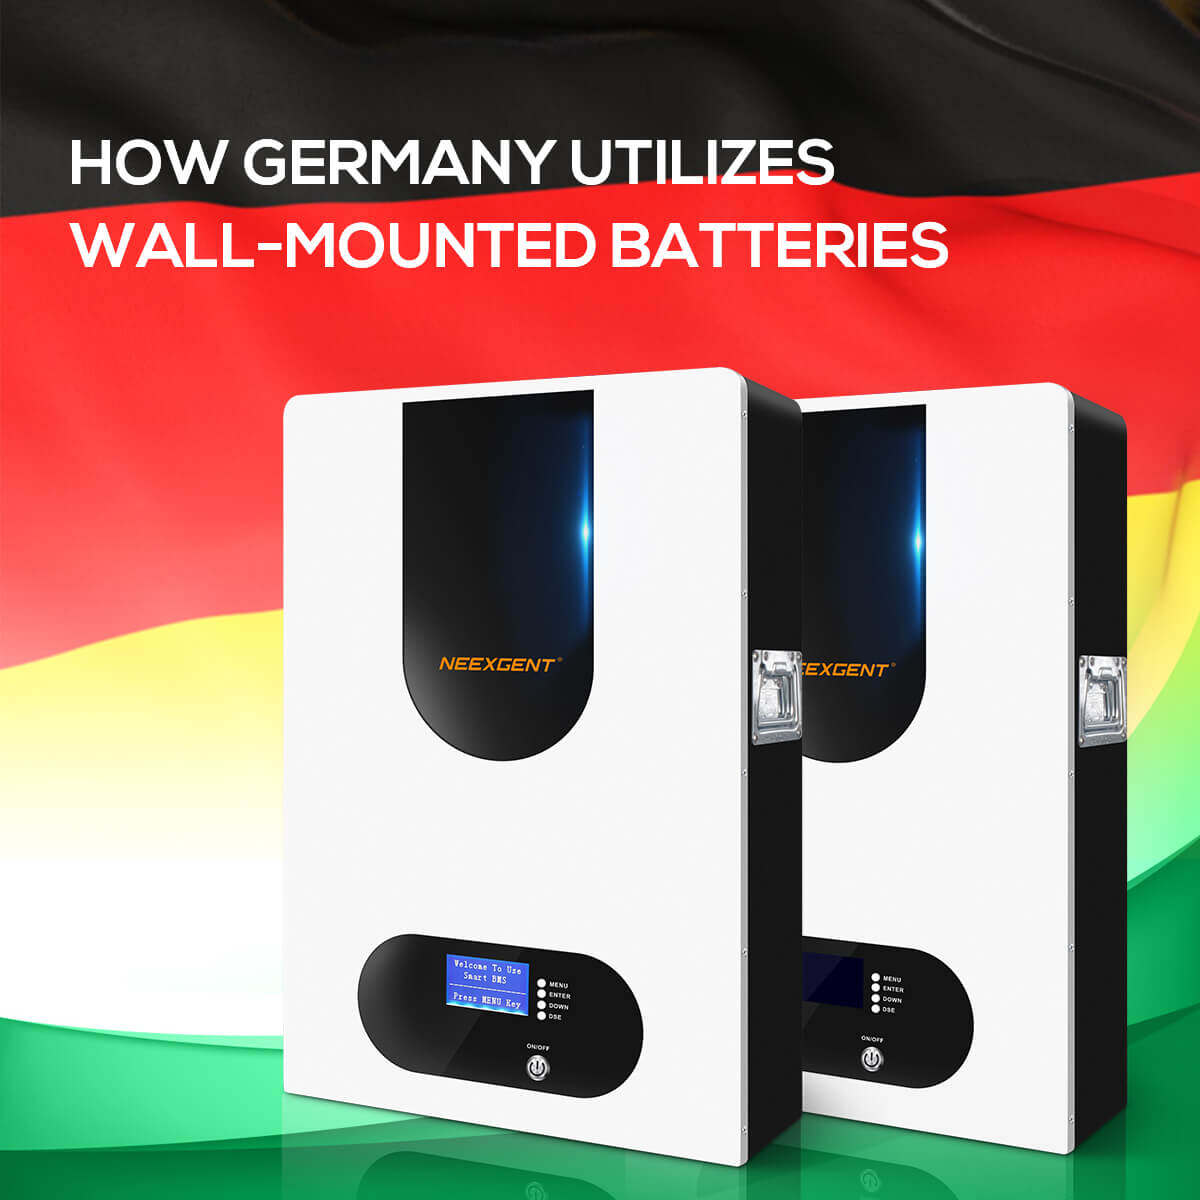 How Germany Utilizes Wall-Mounted Batteries